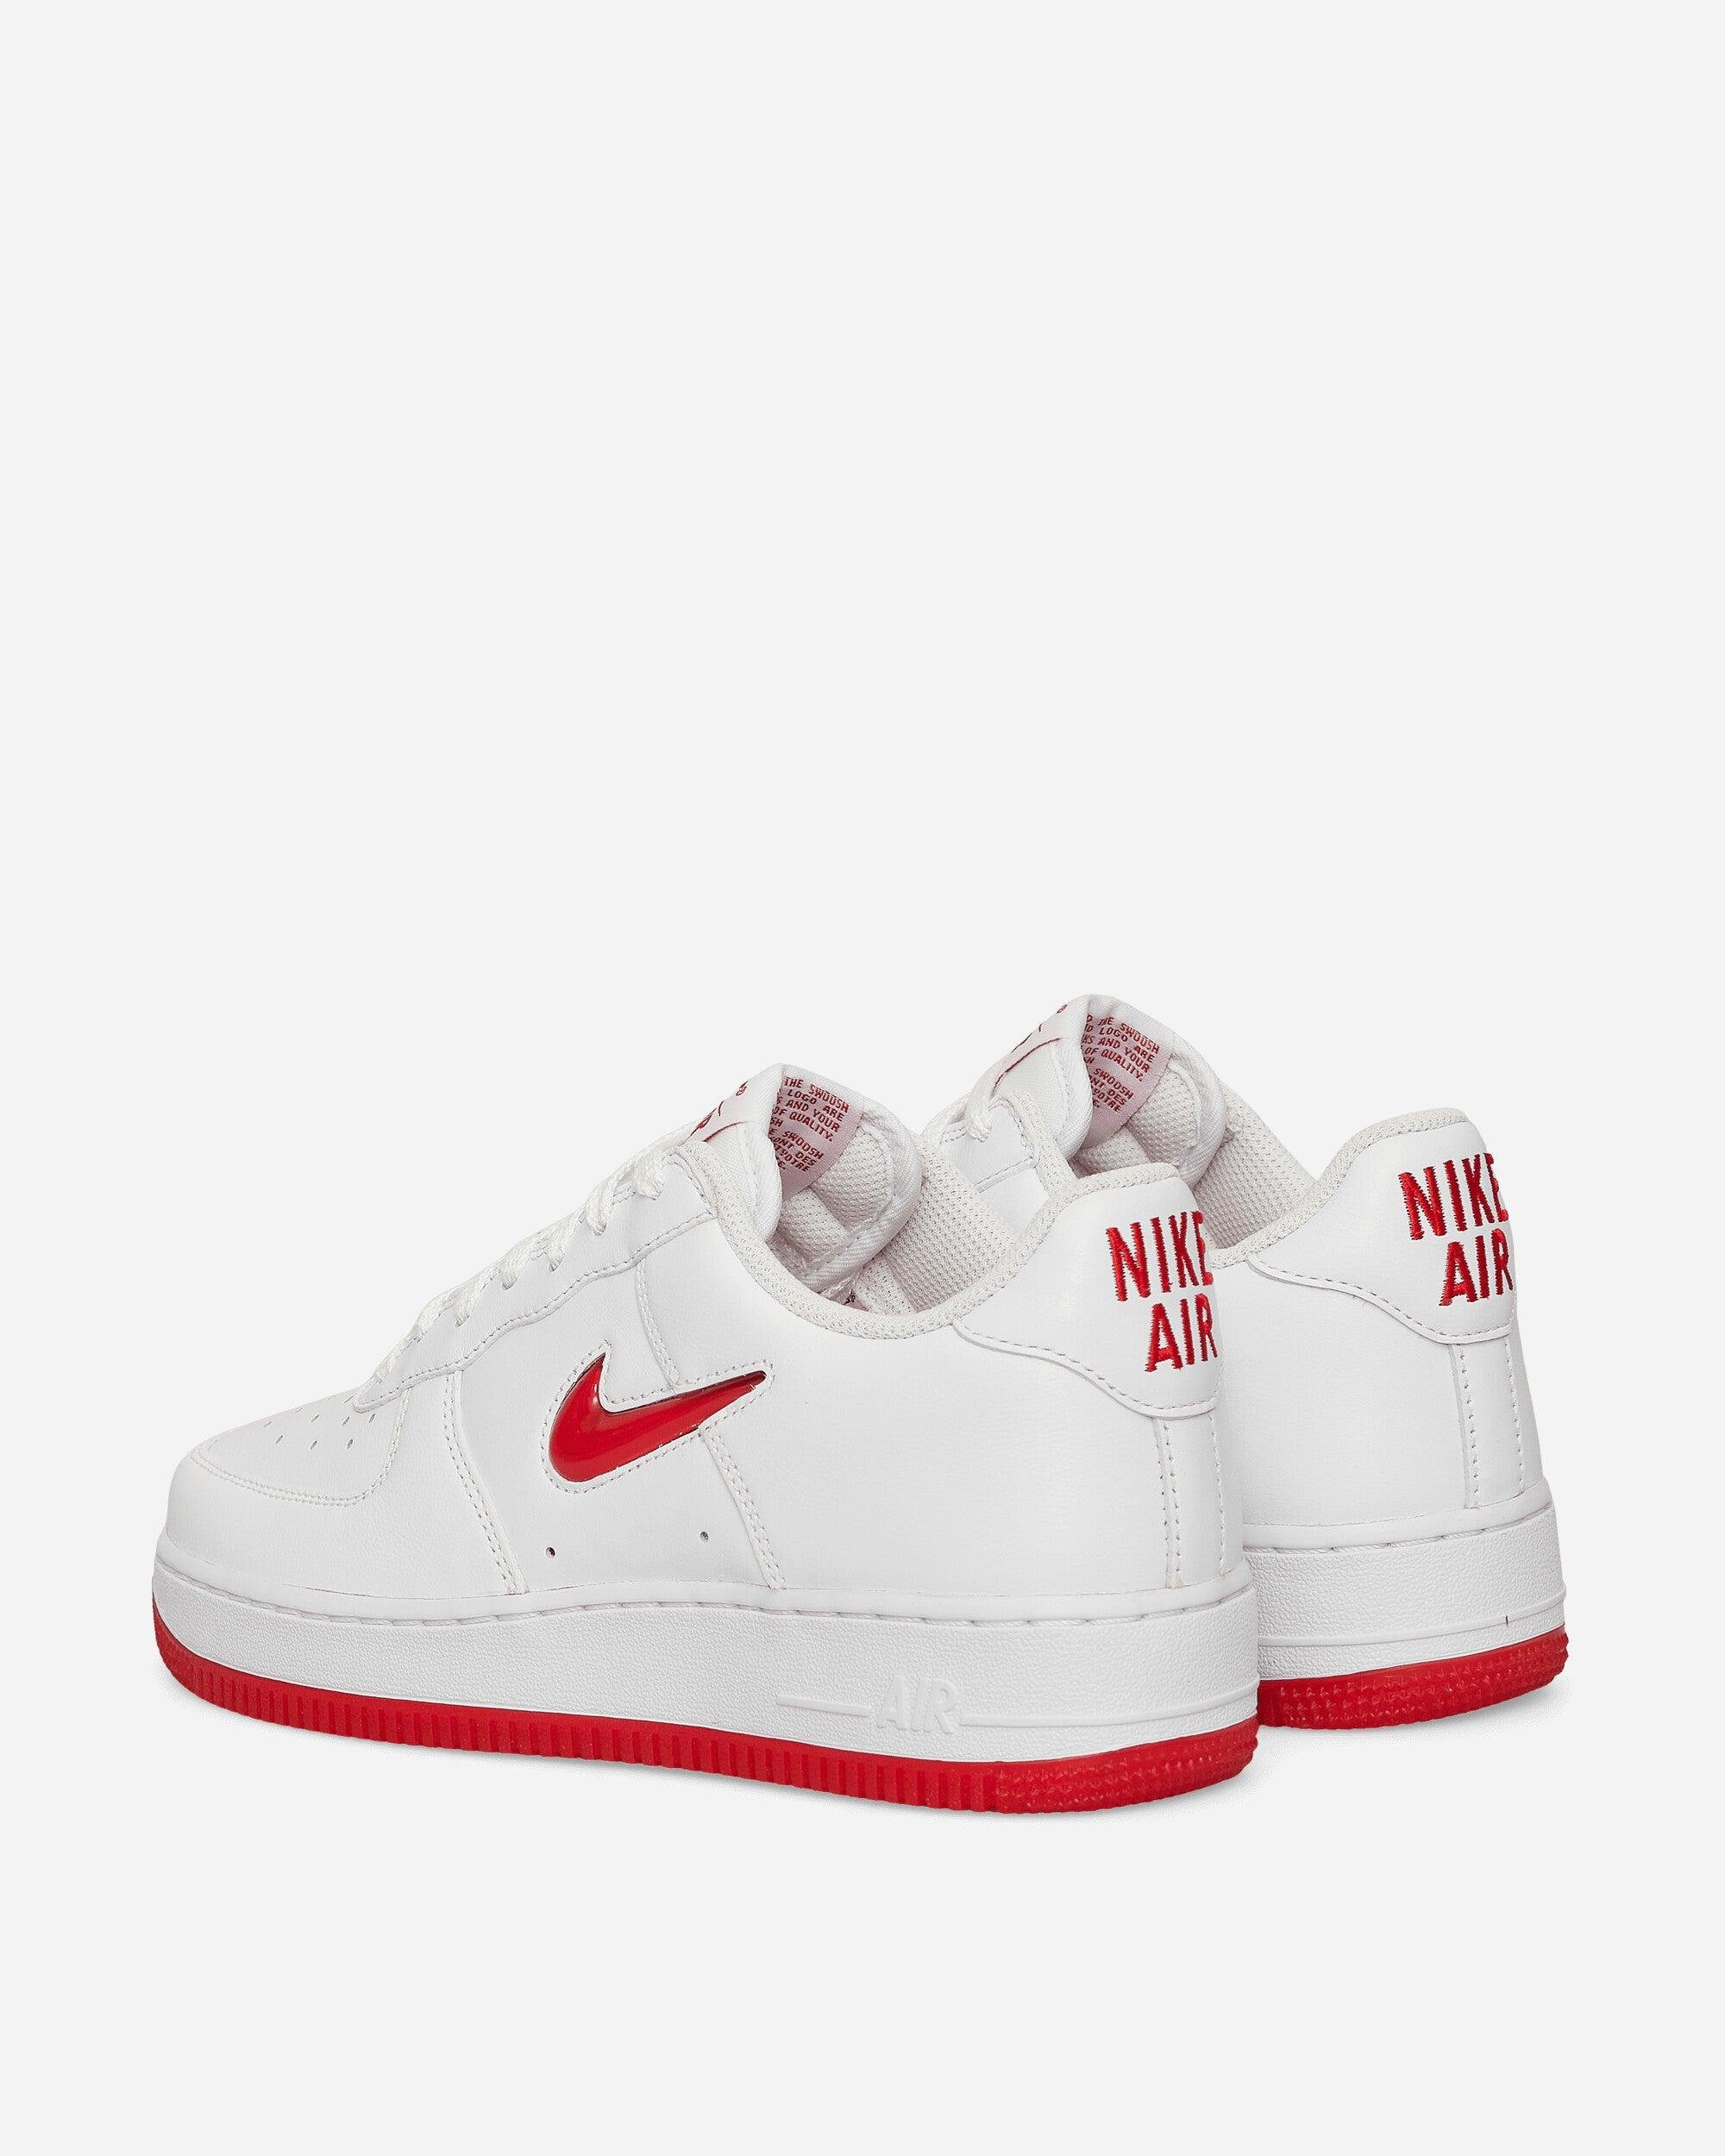 Nike Air Force 1 '07 LV8 University Red